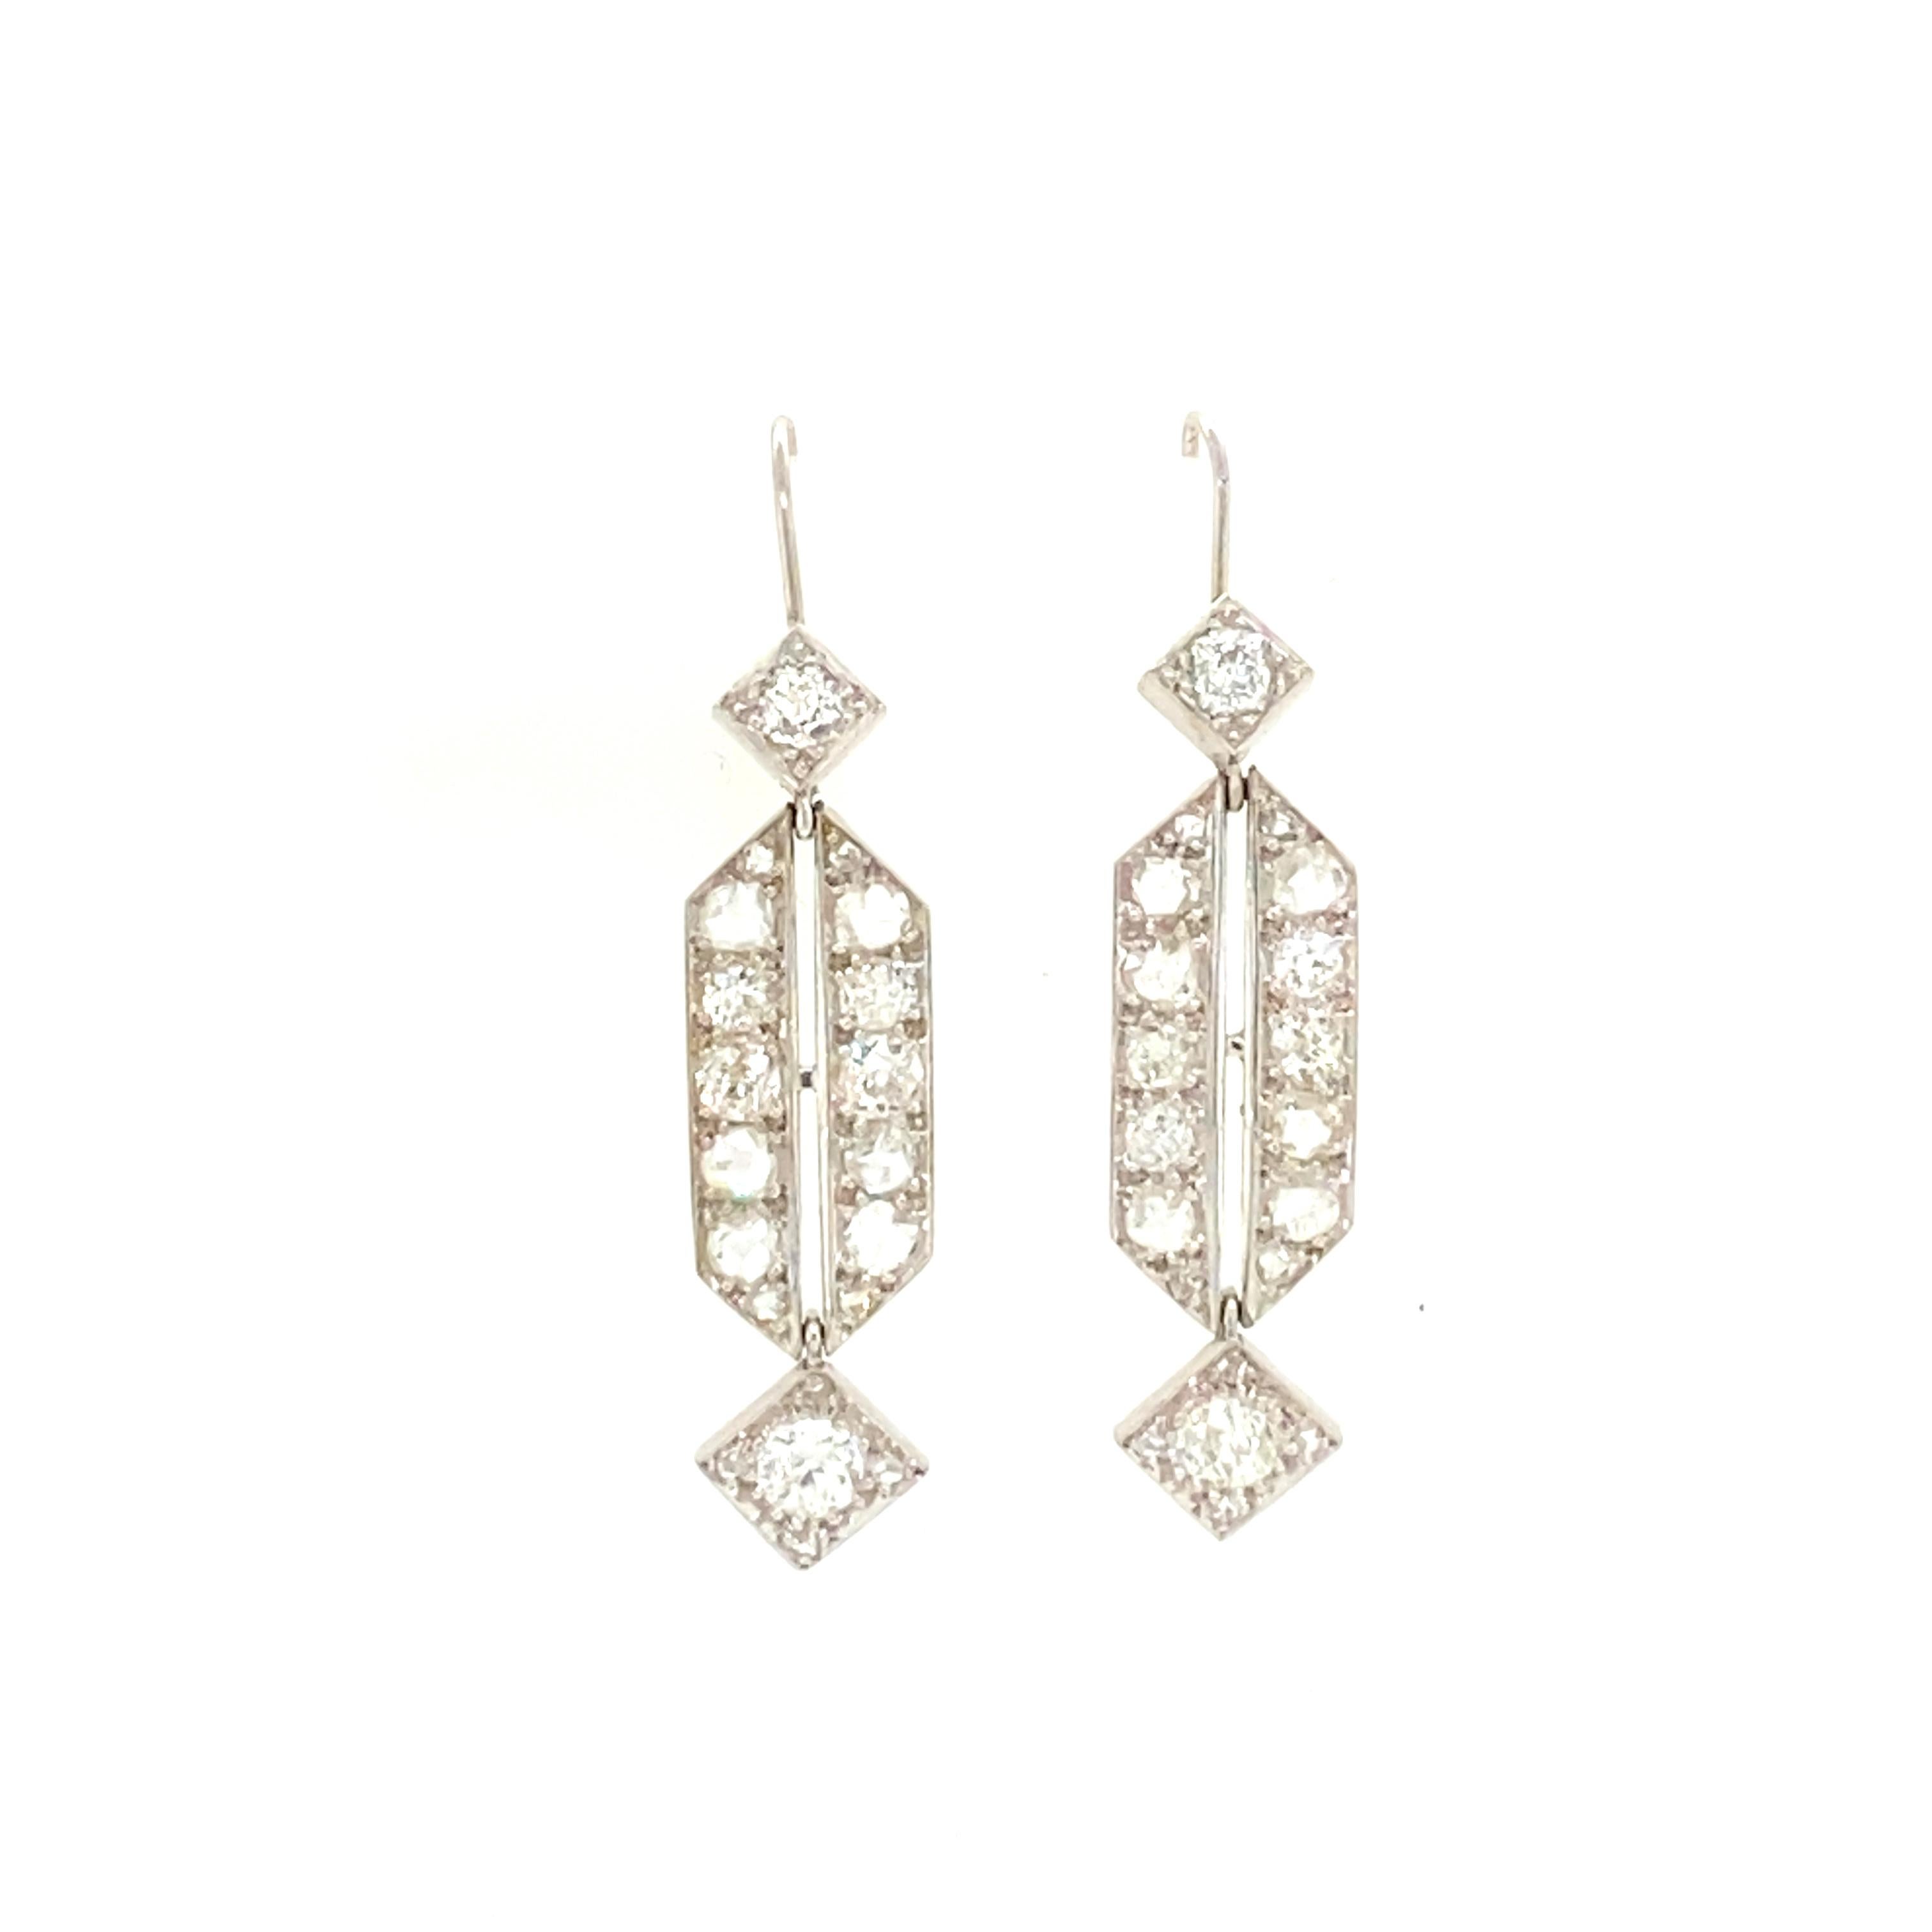 Own a piece of history with these beautiful antique diamond earrings. The dangle hook backs are easy to put in and stay on the ear. The top of the earring is a diamond shape with a round cut diamond center. The center of the earring is long hexagon